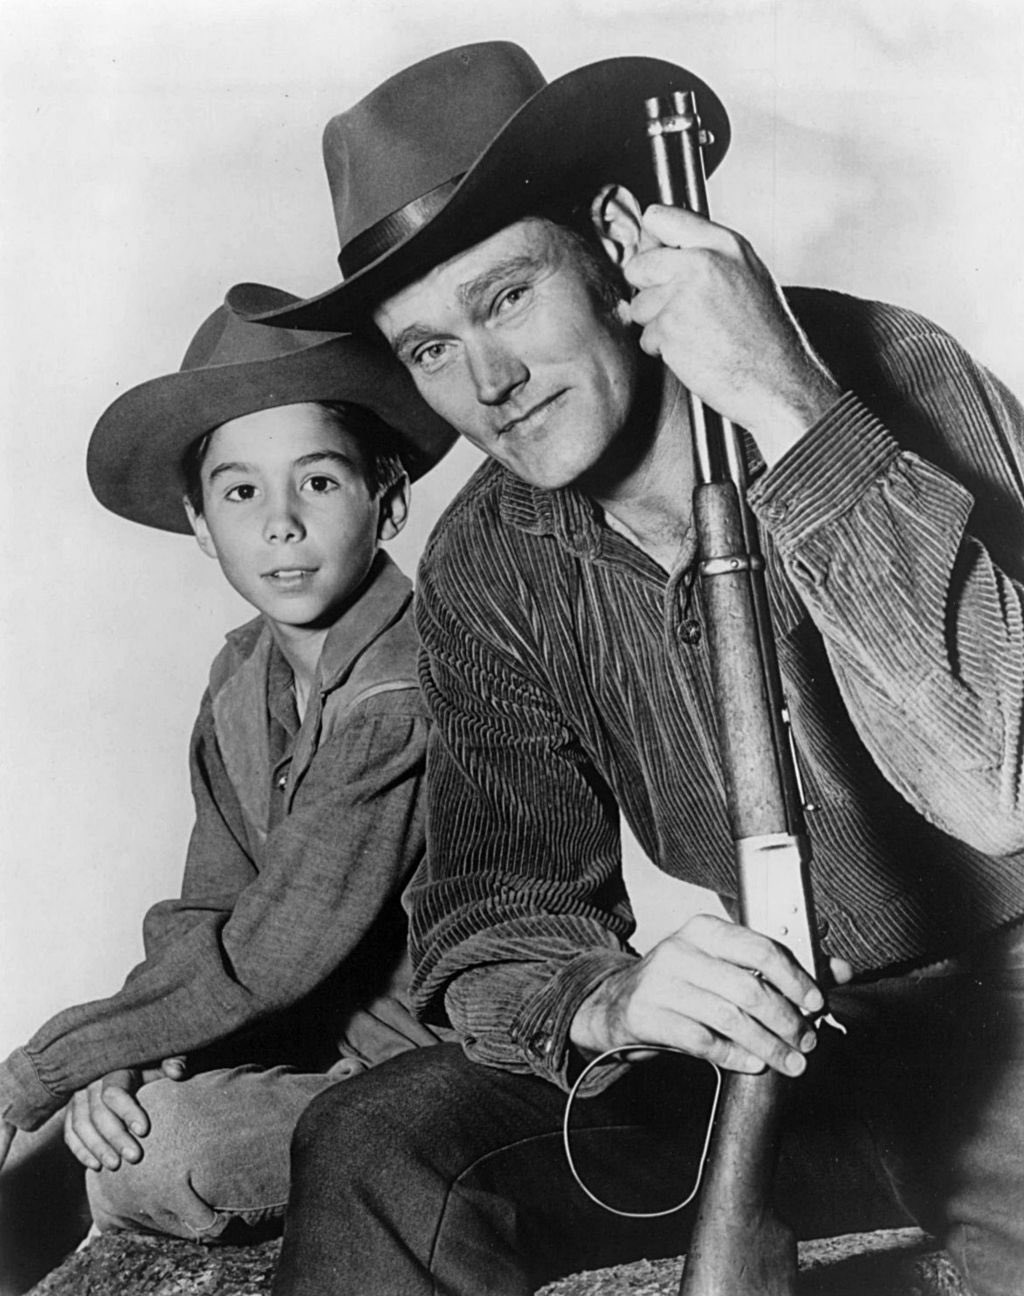 13. At age 12, Johnny Crawford rose to prominence playing Mark McCain in th...